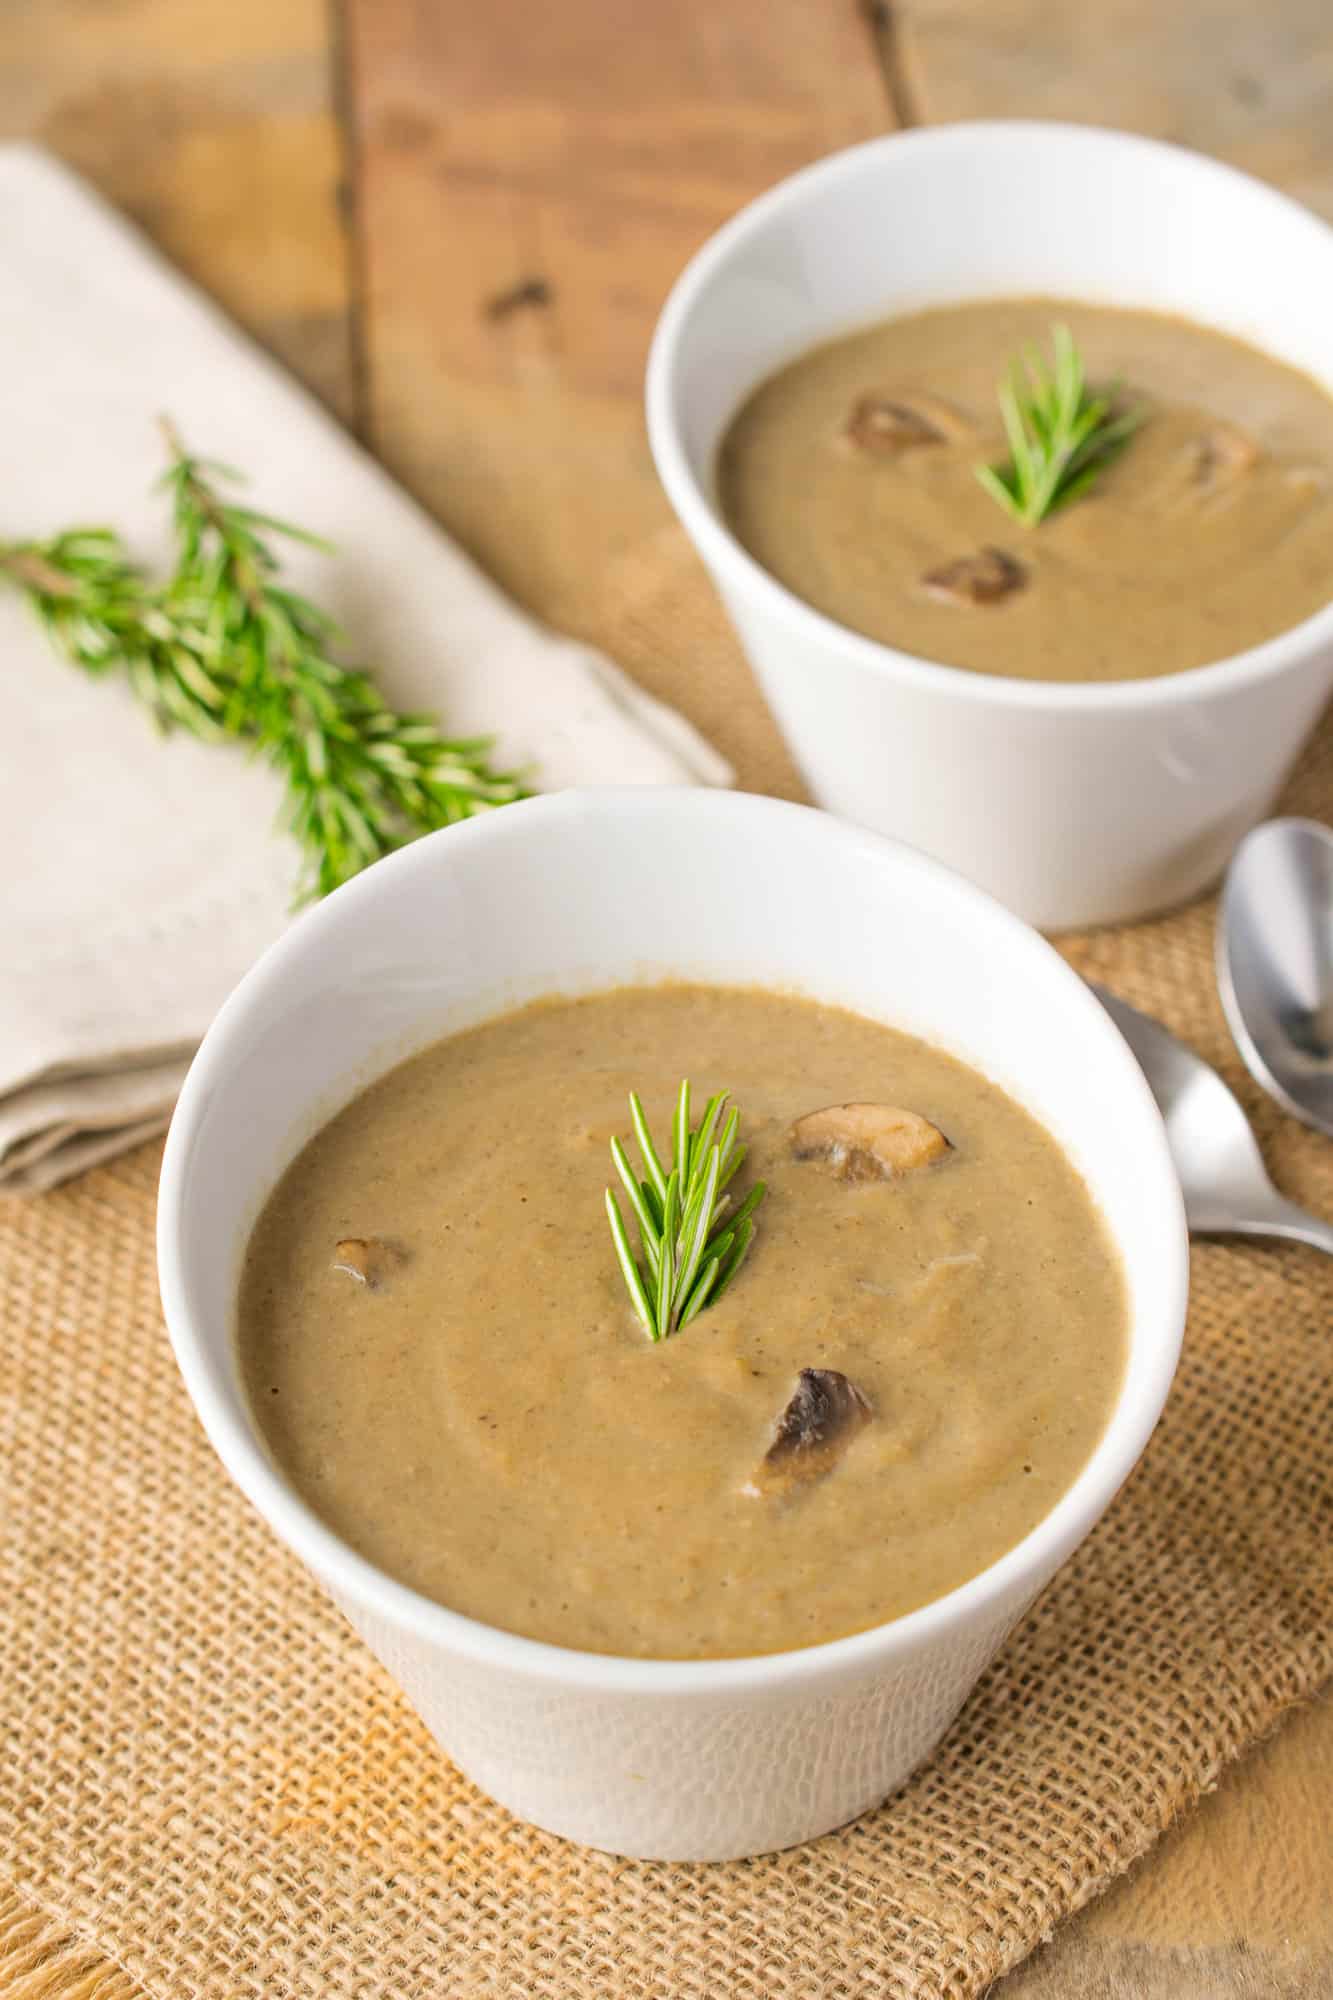 Vegan mushroom soup served in decorative white bowls garnished with fresh rosemary